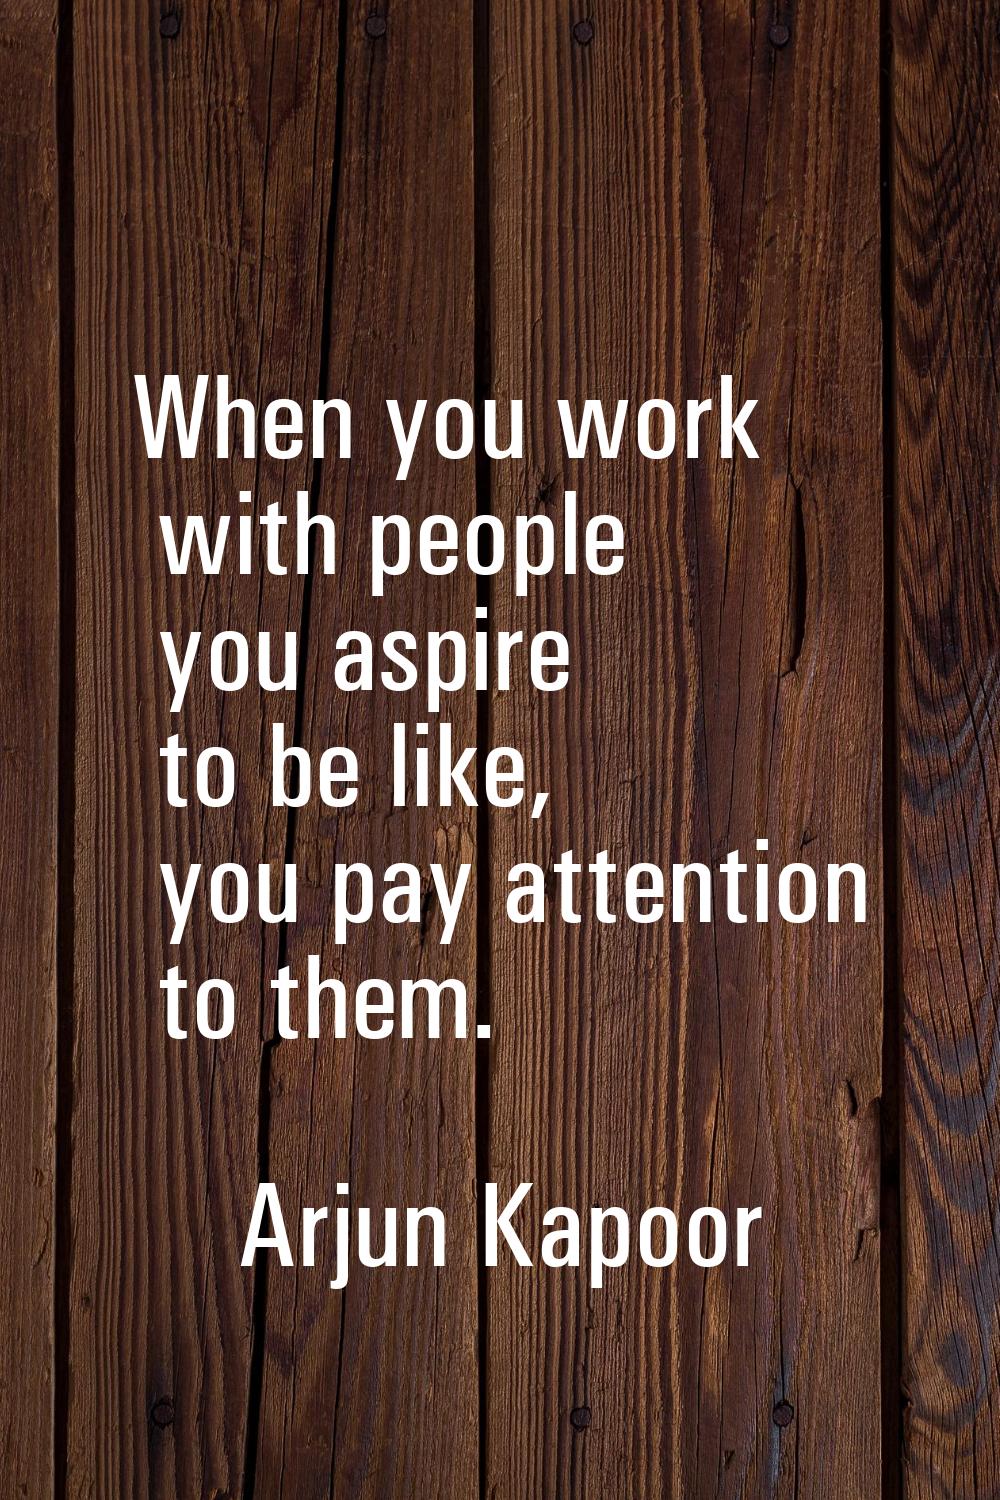 When you work with people you aspire to be like, you pay attention to them.